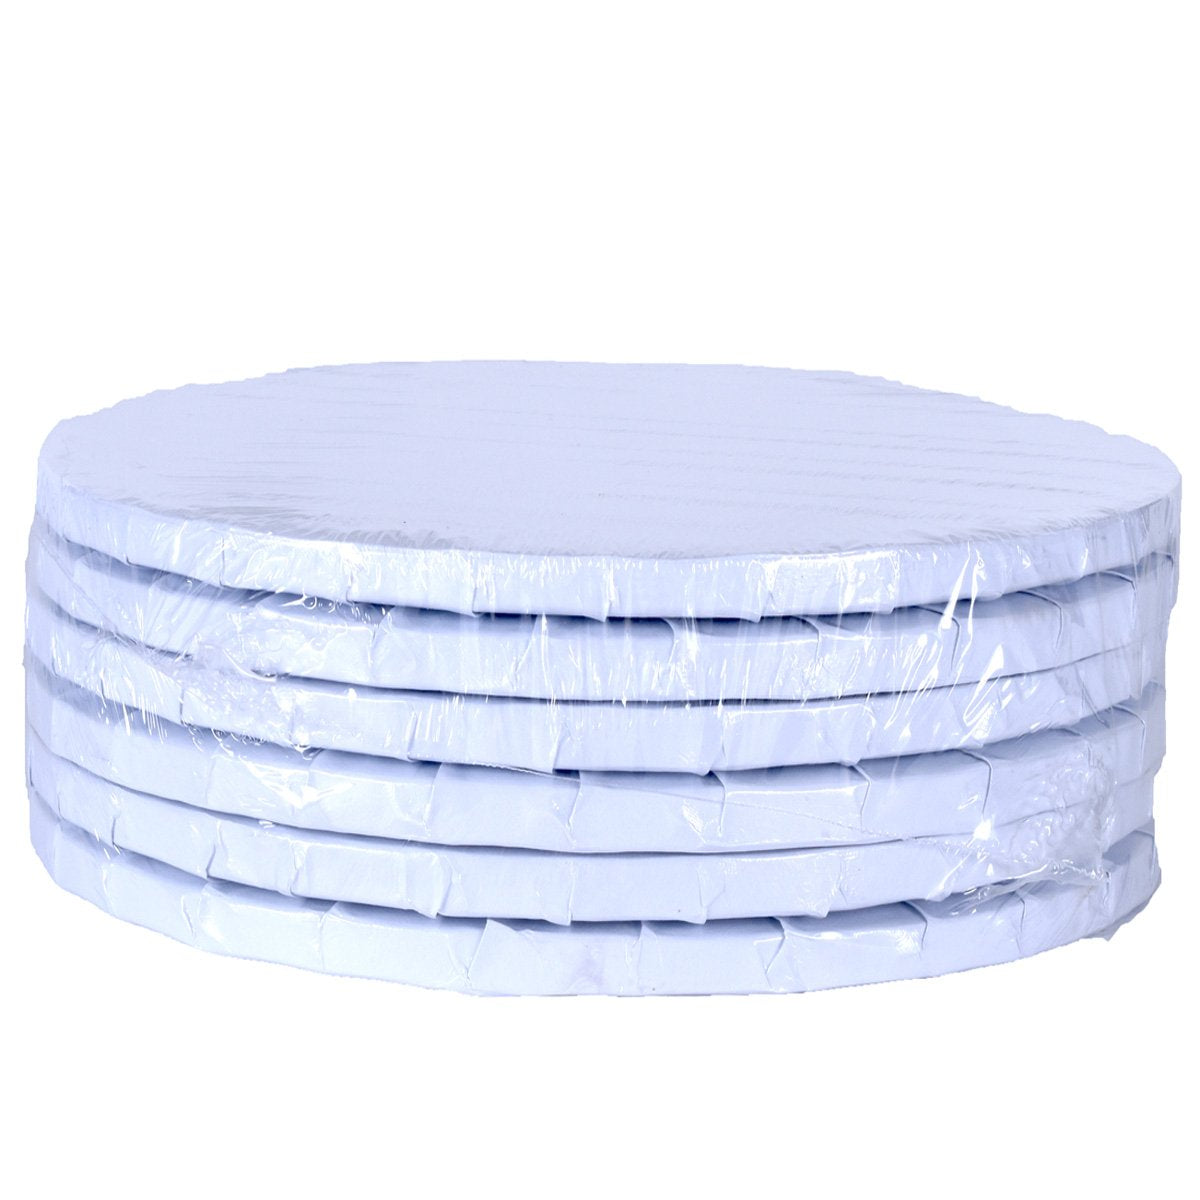 White Circle Cake Drums — All Sizes Whalen Packaging Cake Drum - Bake Supply Plus